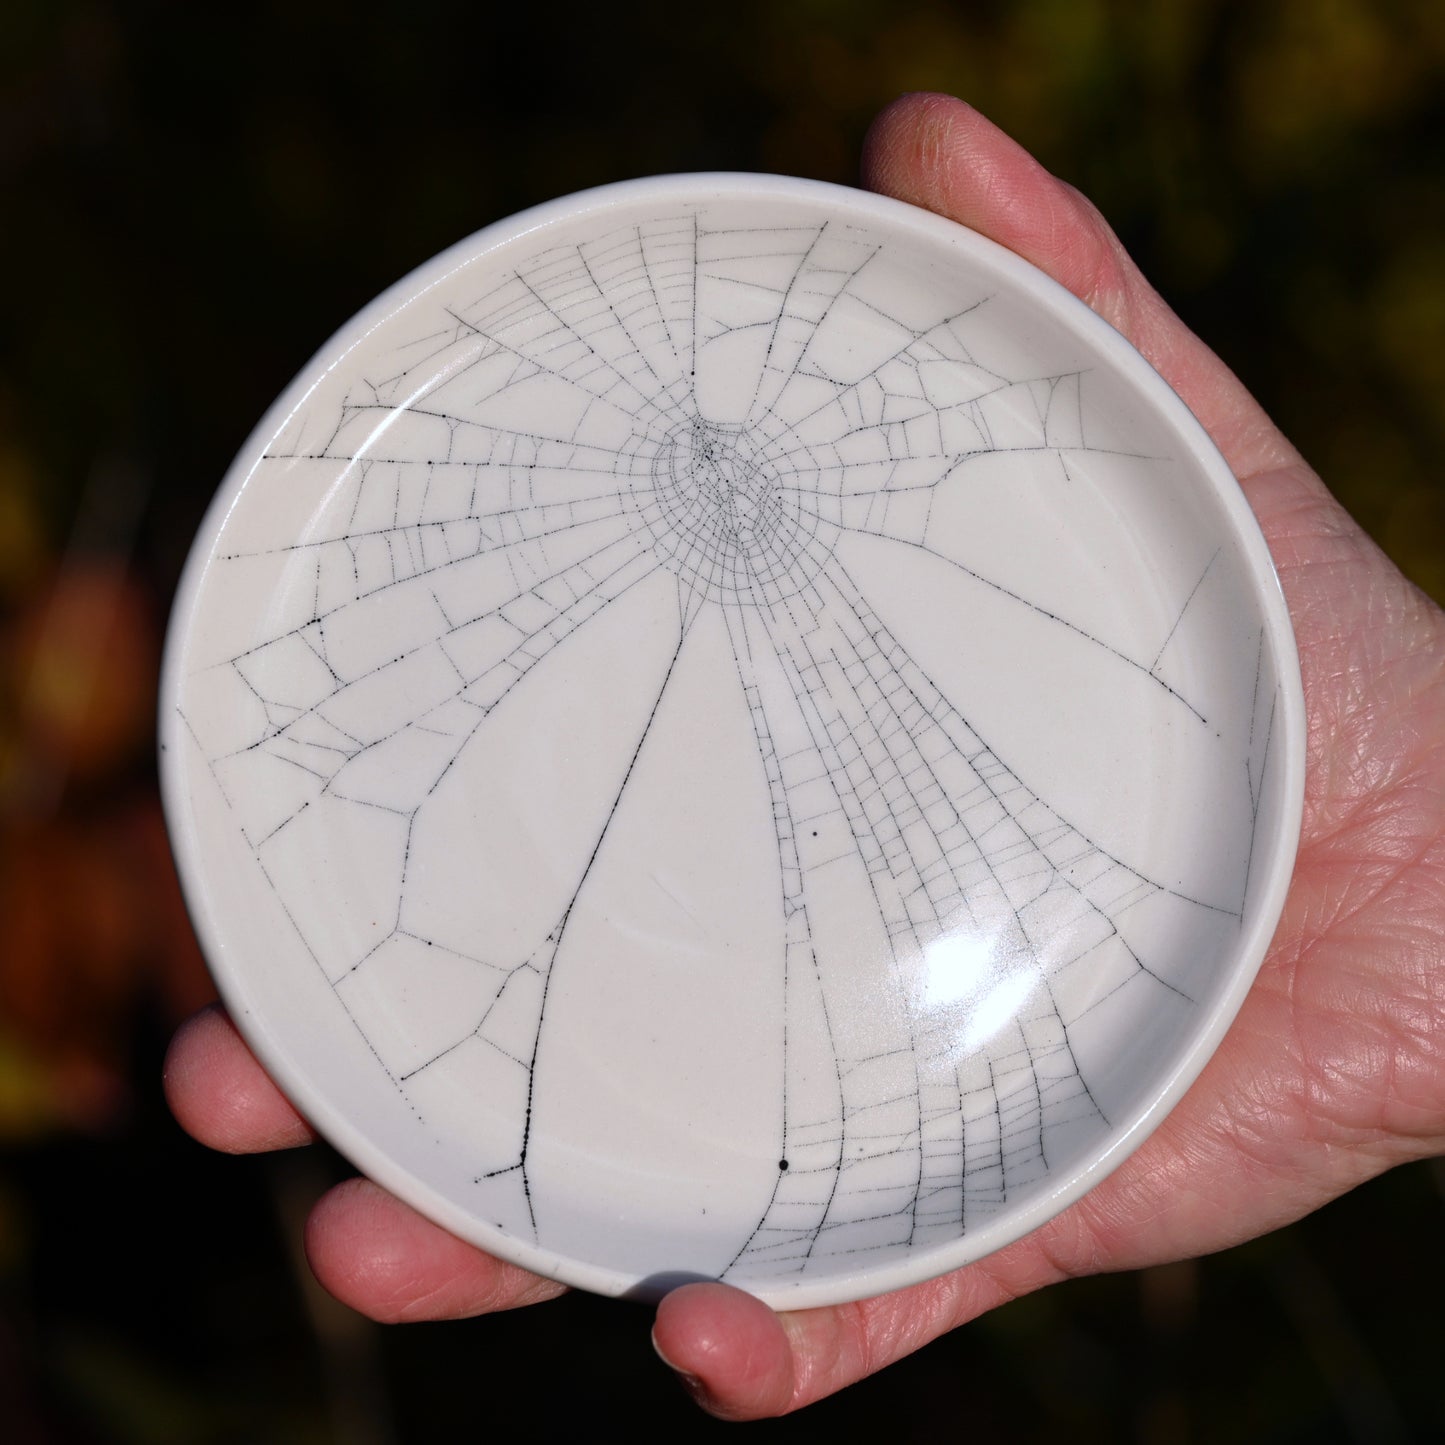 Web on Clay (226), Collected October 30, 2022